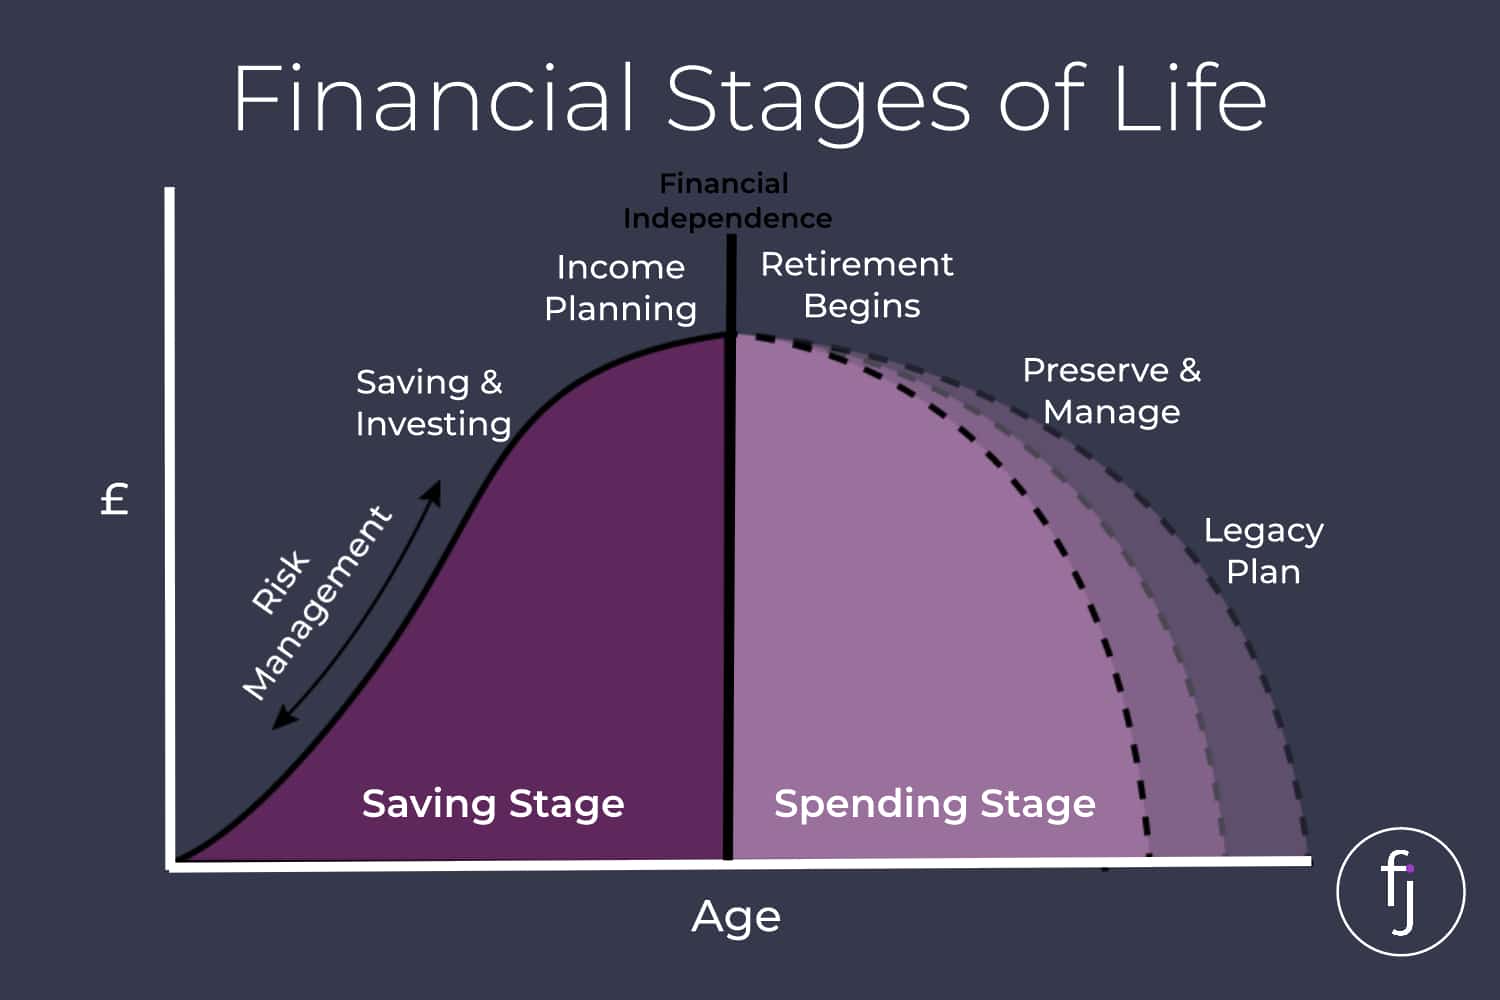 Certified Financial Planner Financial Stages of Life